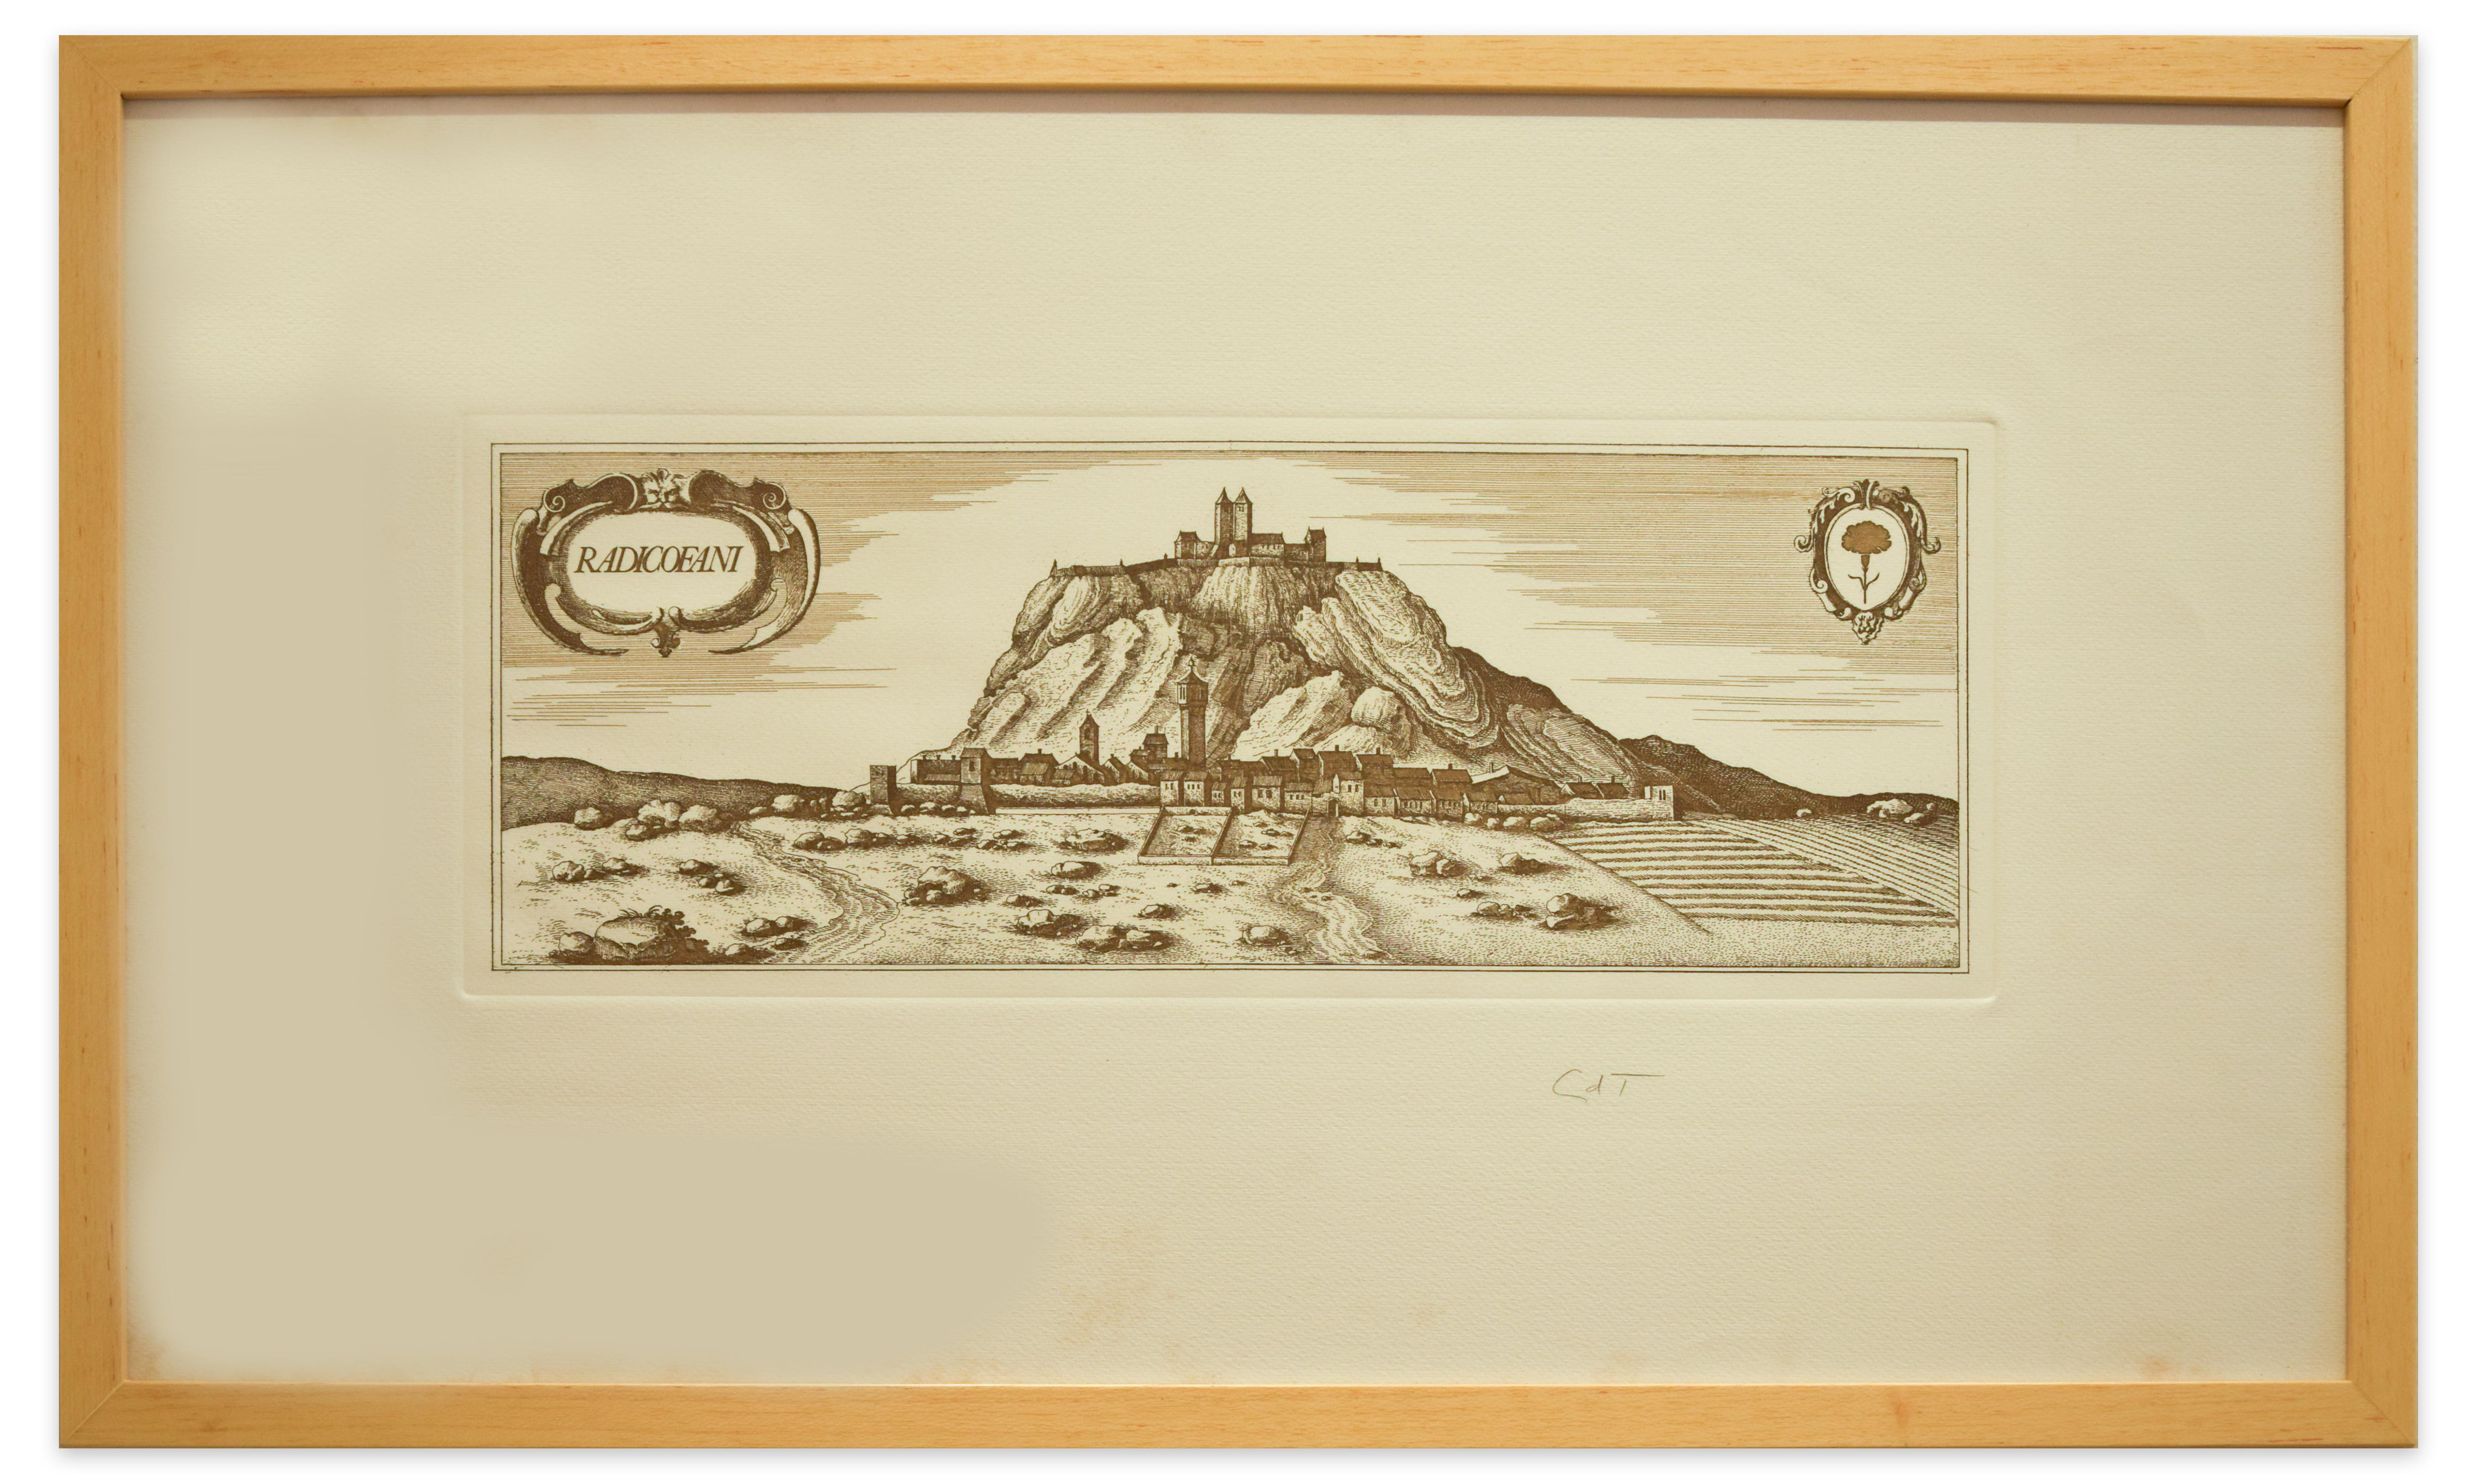 Image dimensions: 17 x 47  cm.

Radicofani is an original contemporary artwork realized by Bettino Craxi in the first years of the 1980s. 

Original Etching on cardboard. 

Hand-signed in pencil 